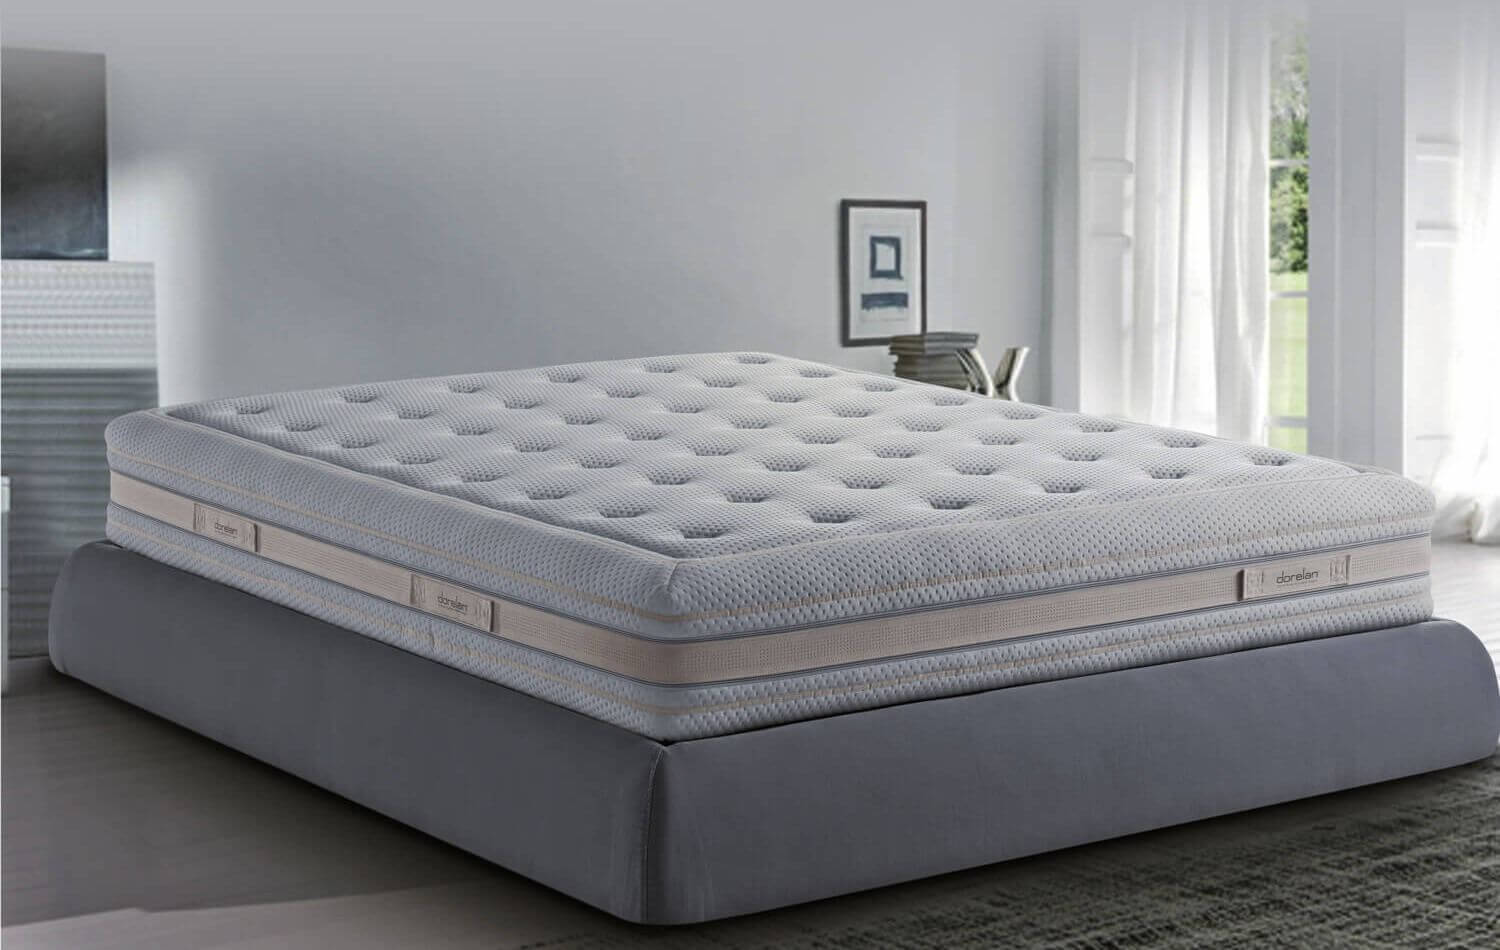 Best Ortho Mattress for Sale in Pakistan: A Night of Blissful Sleep!